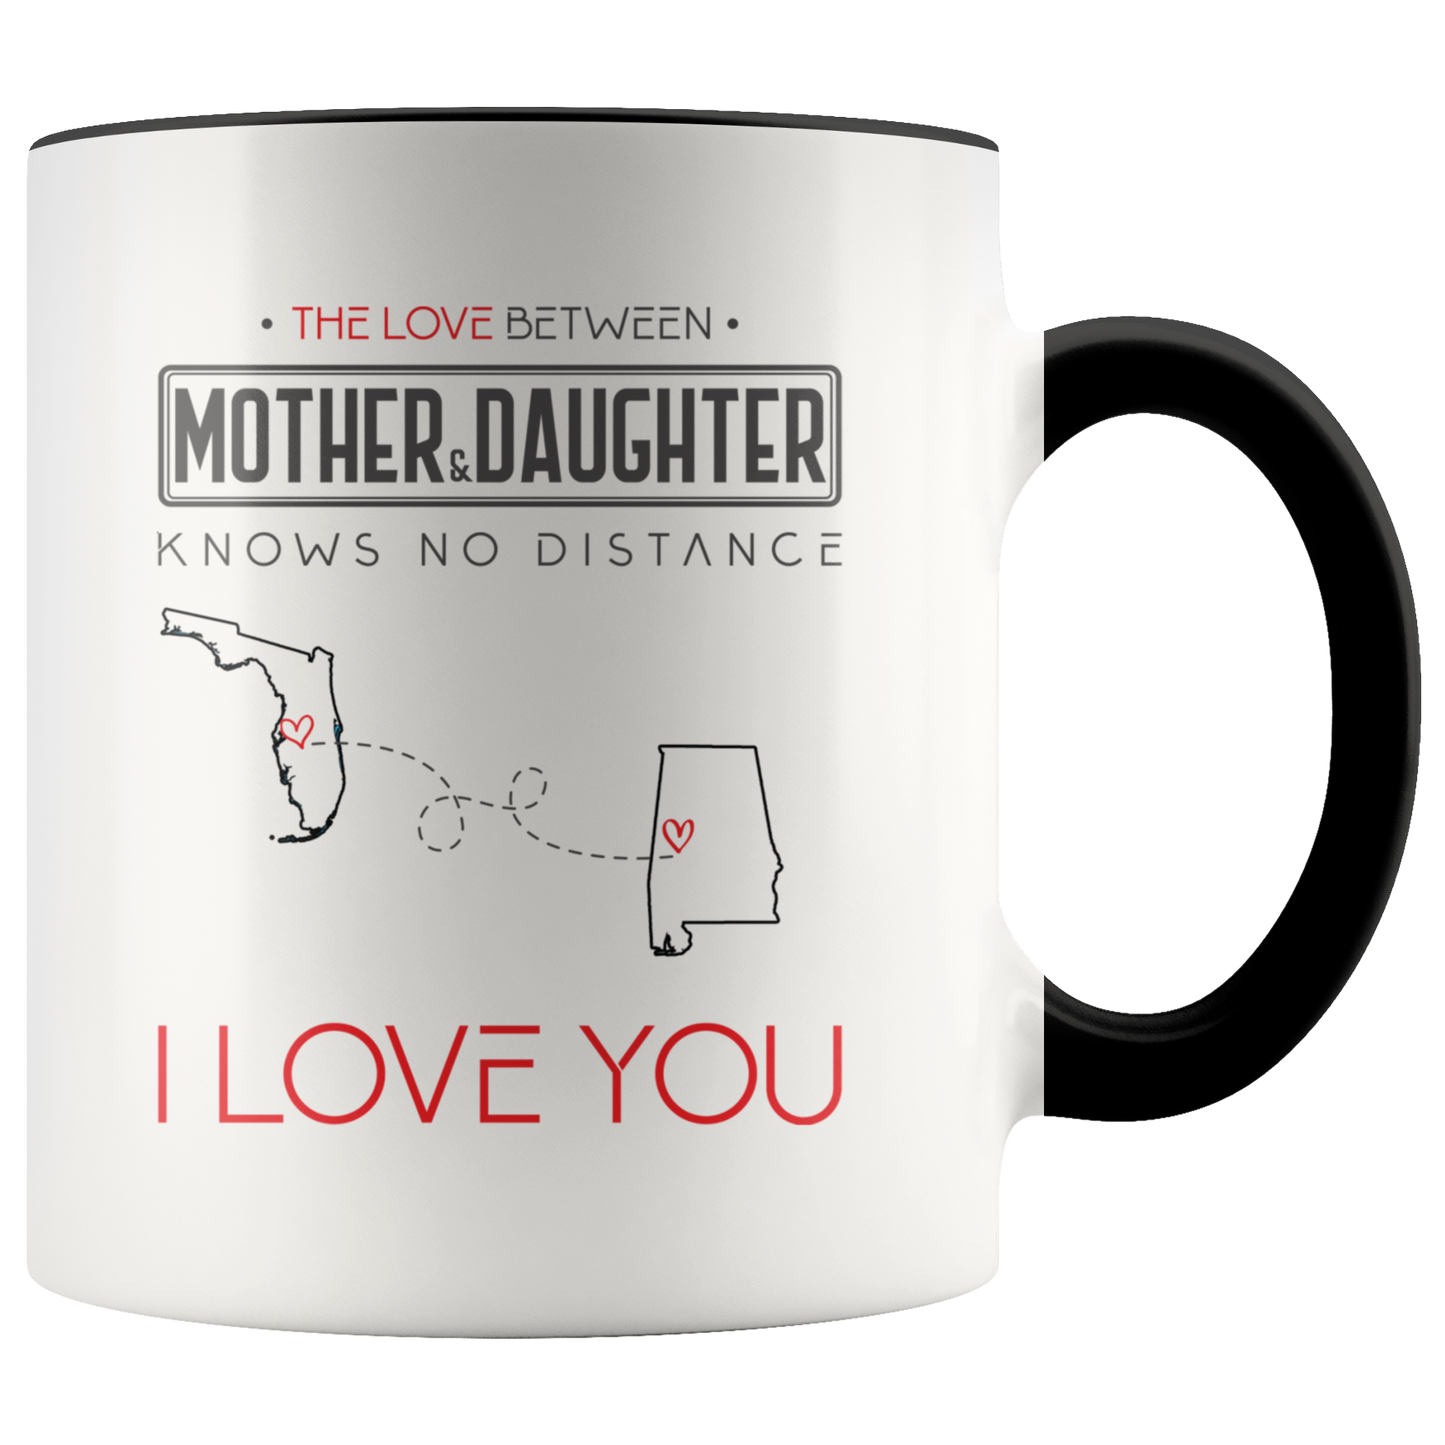 ND-21314080-sp-23852 - [ Florida | Alabama ]Mom And Daughter Accent Mug 11 oz Red - The Love Between Mot